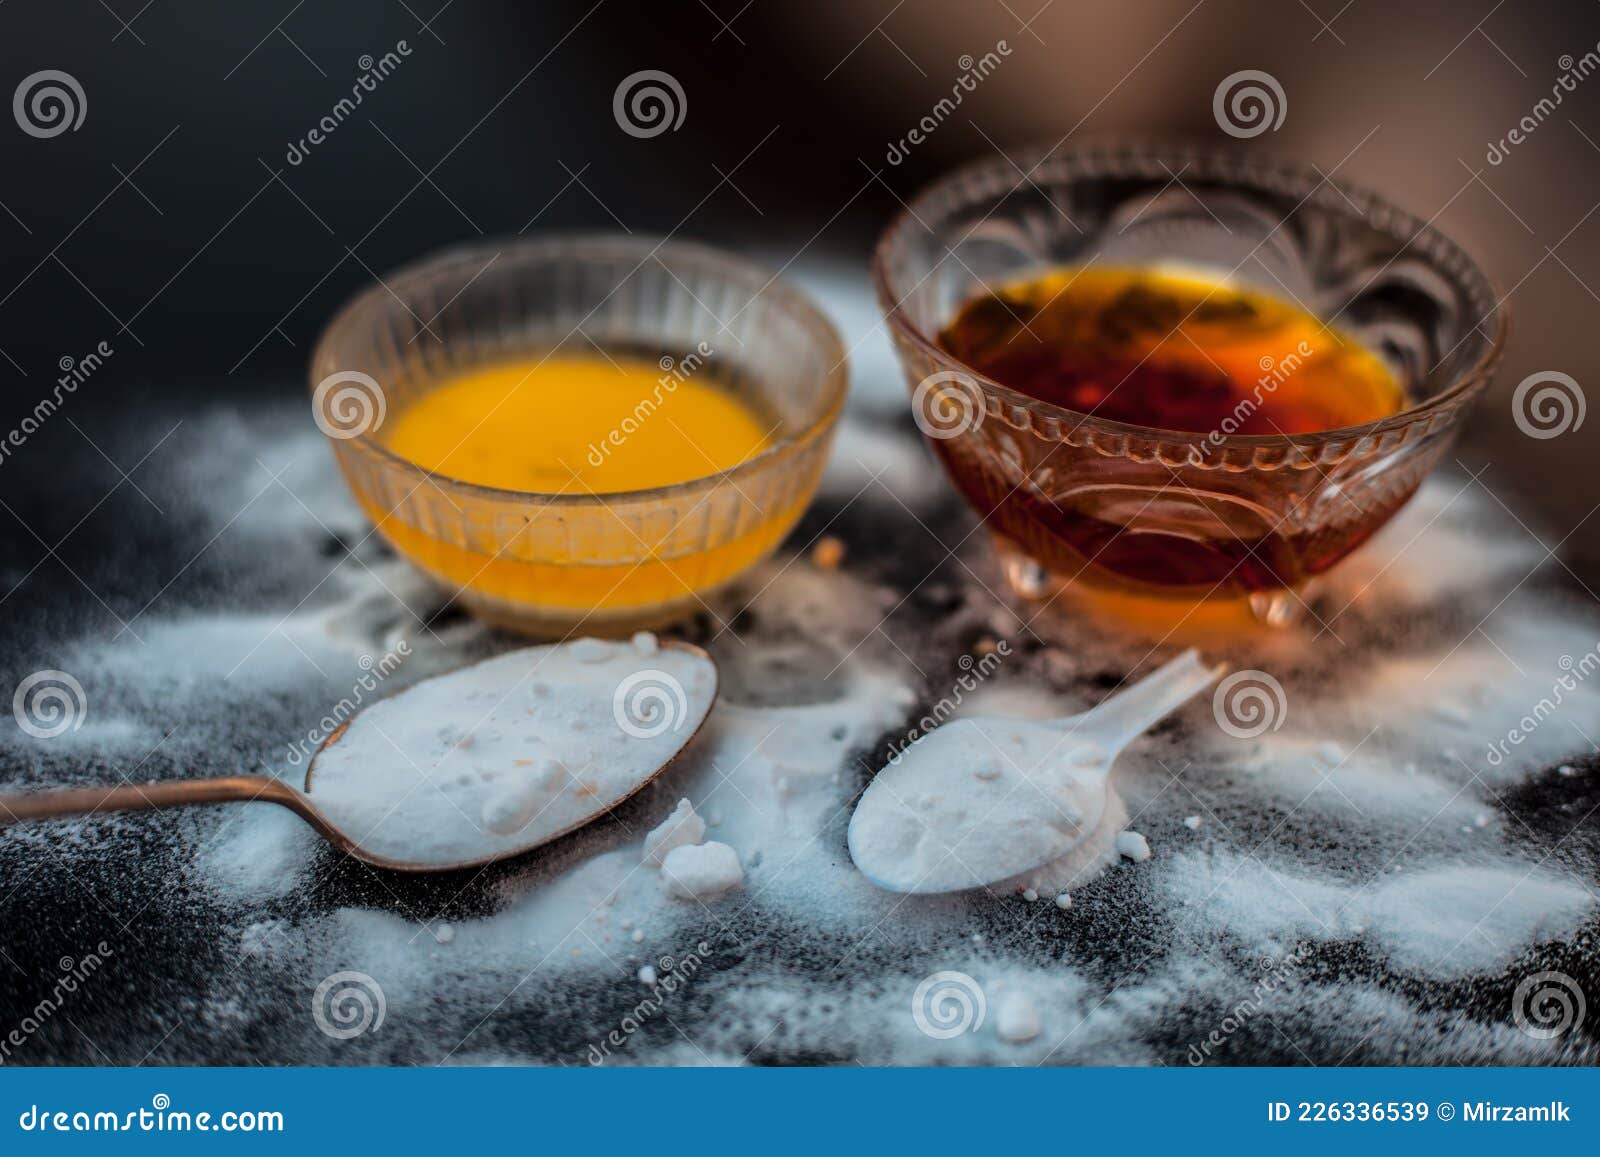 baking soda face mask in a glass bowl on wooden surface along with baking soda powder and honey